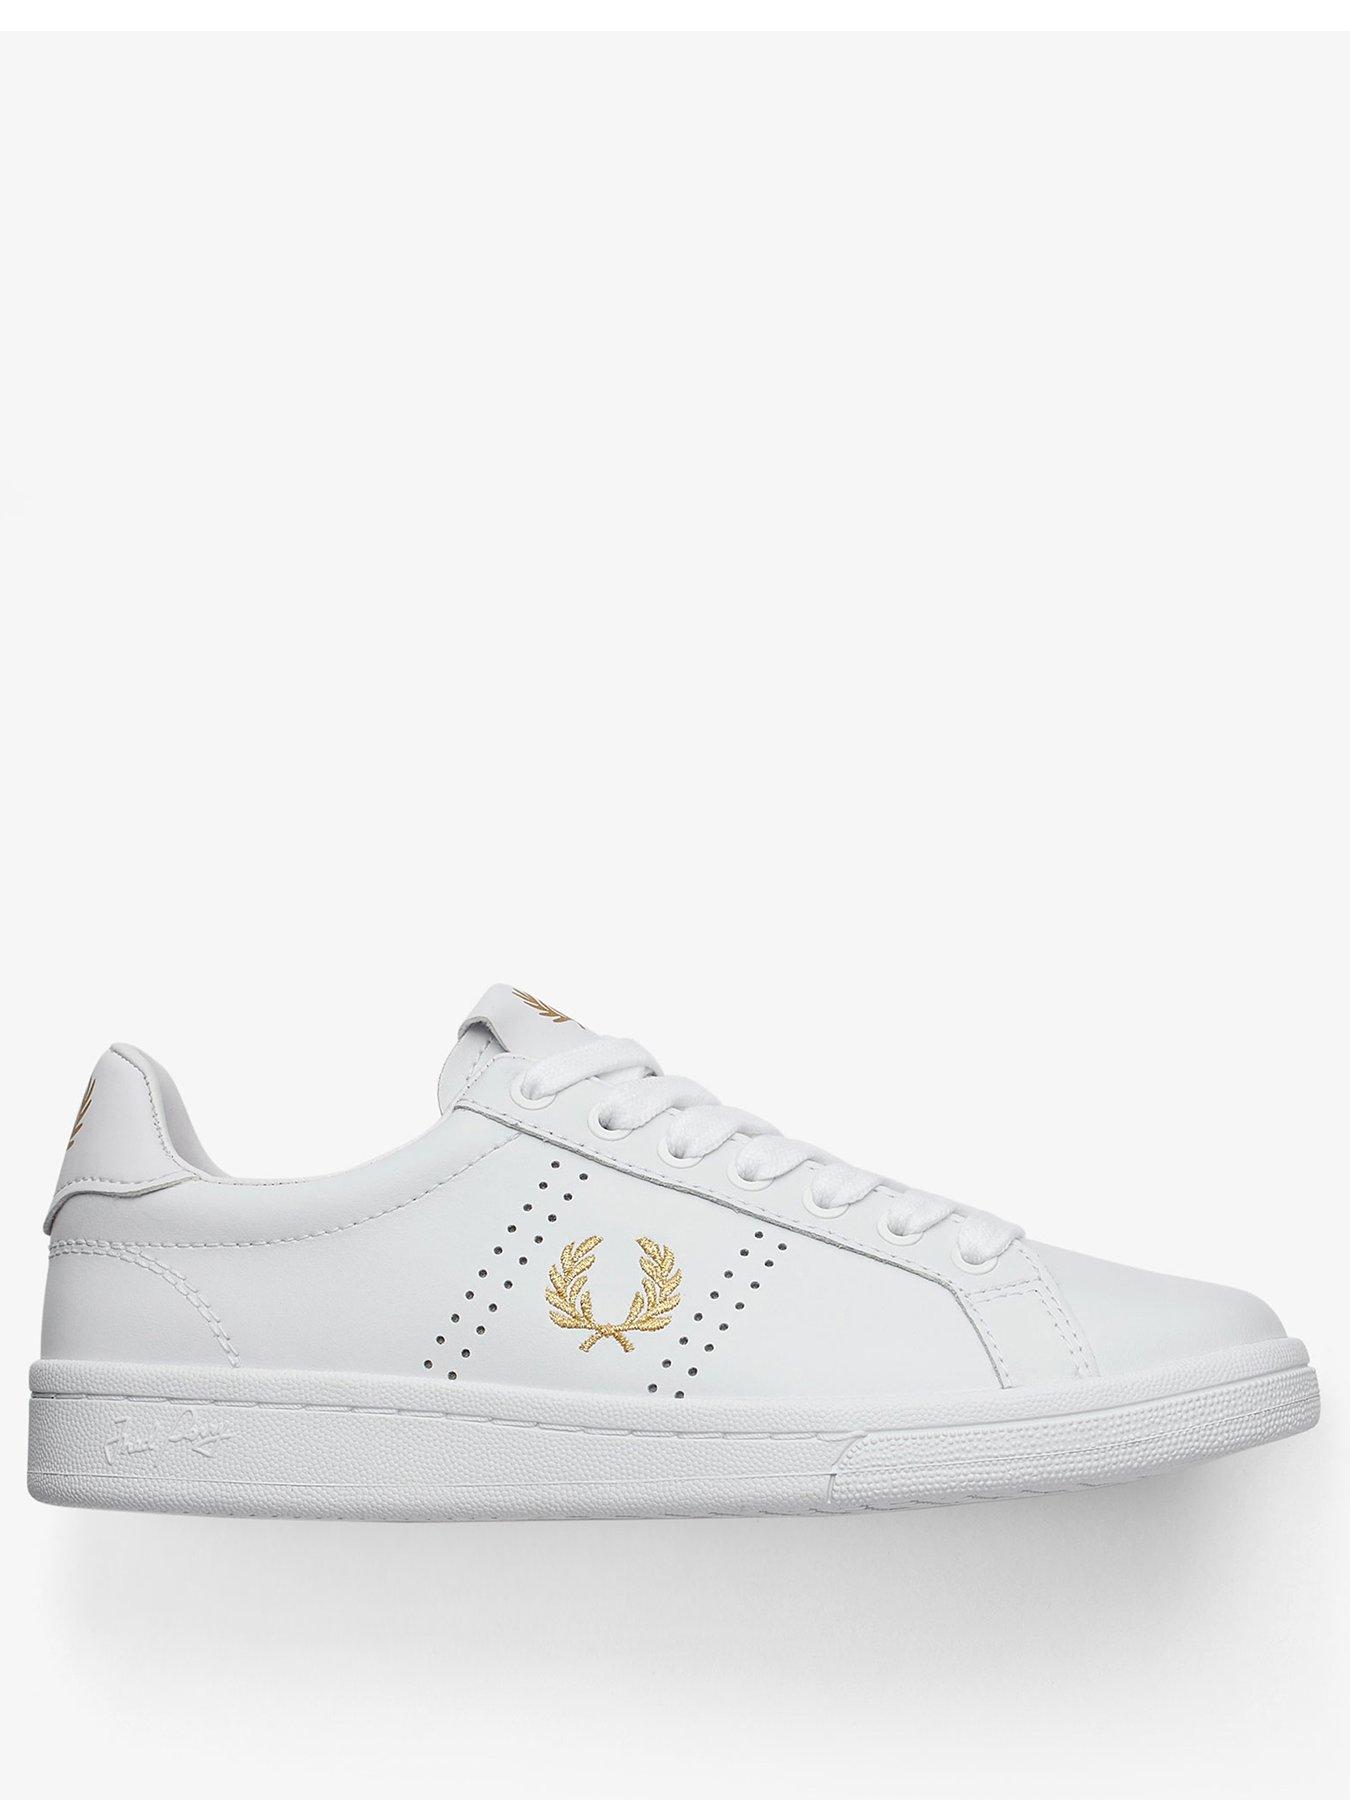 fred perry woman shoes